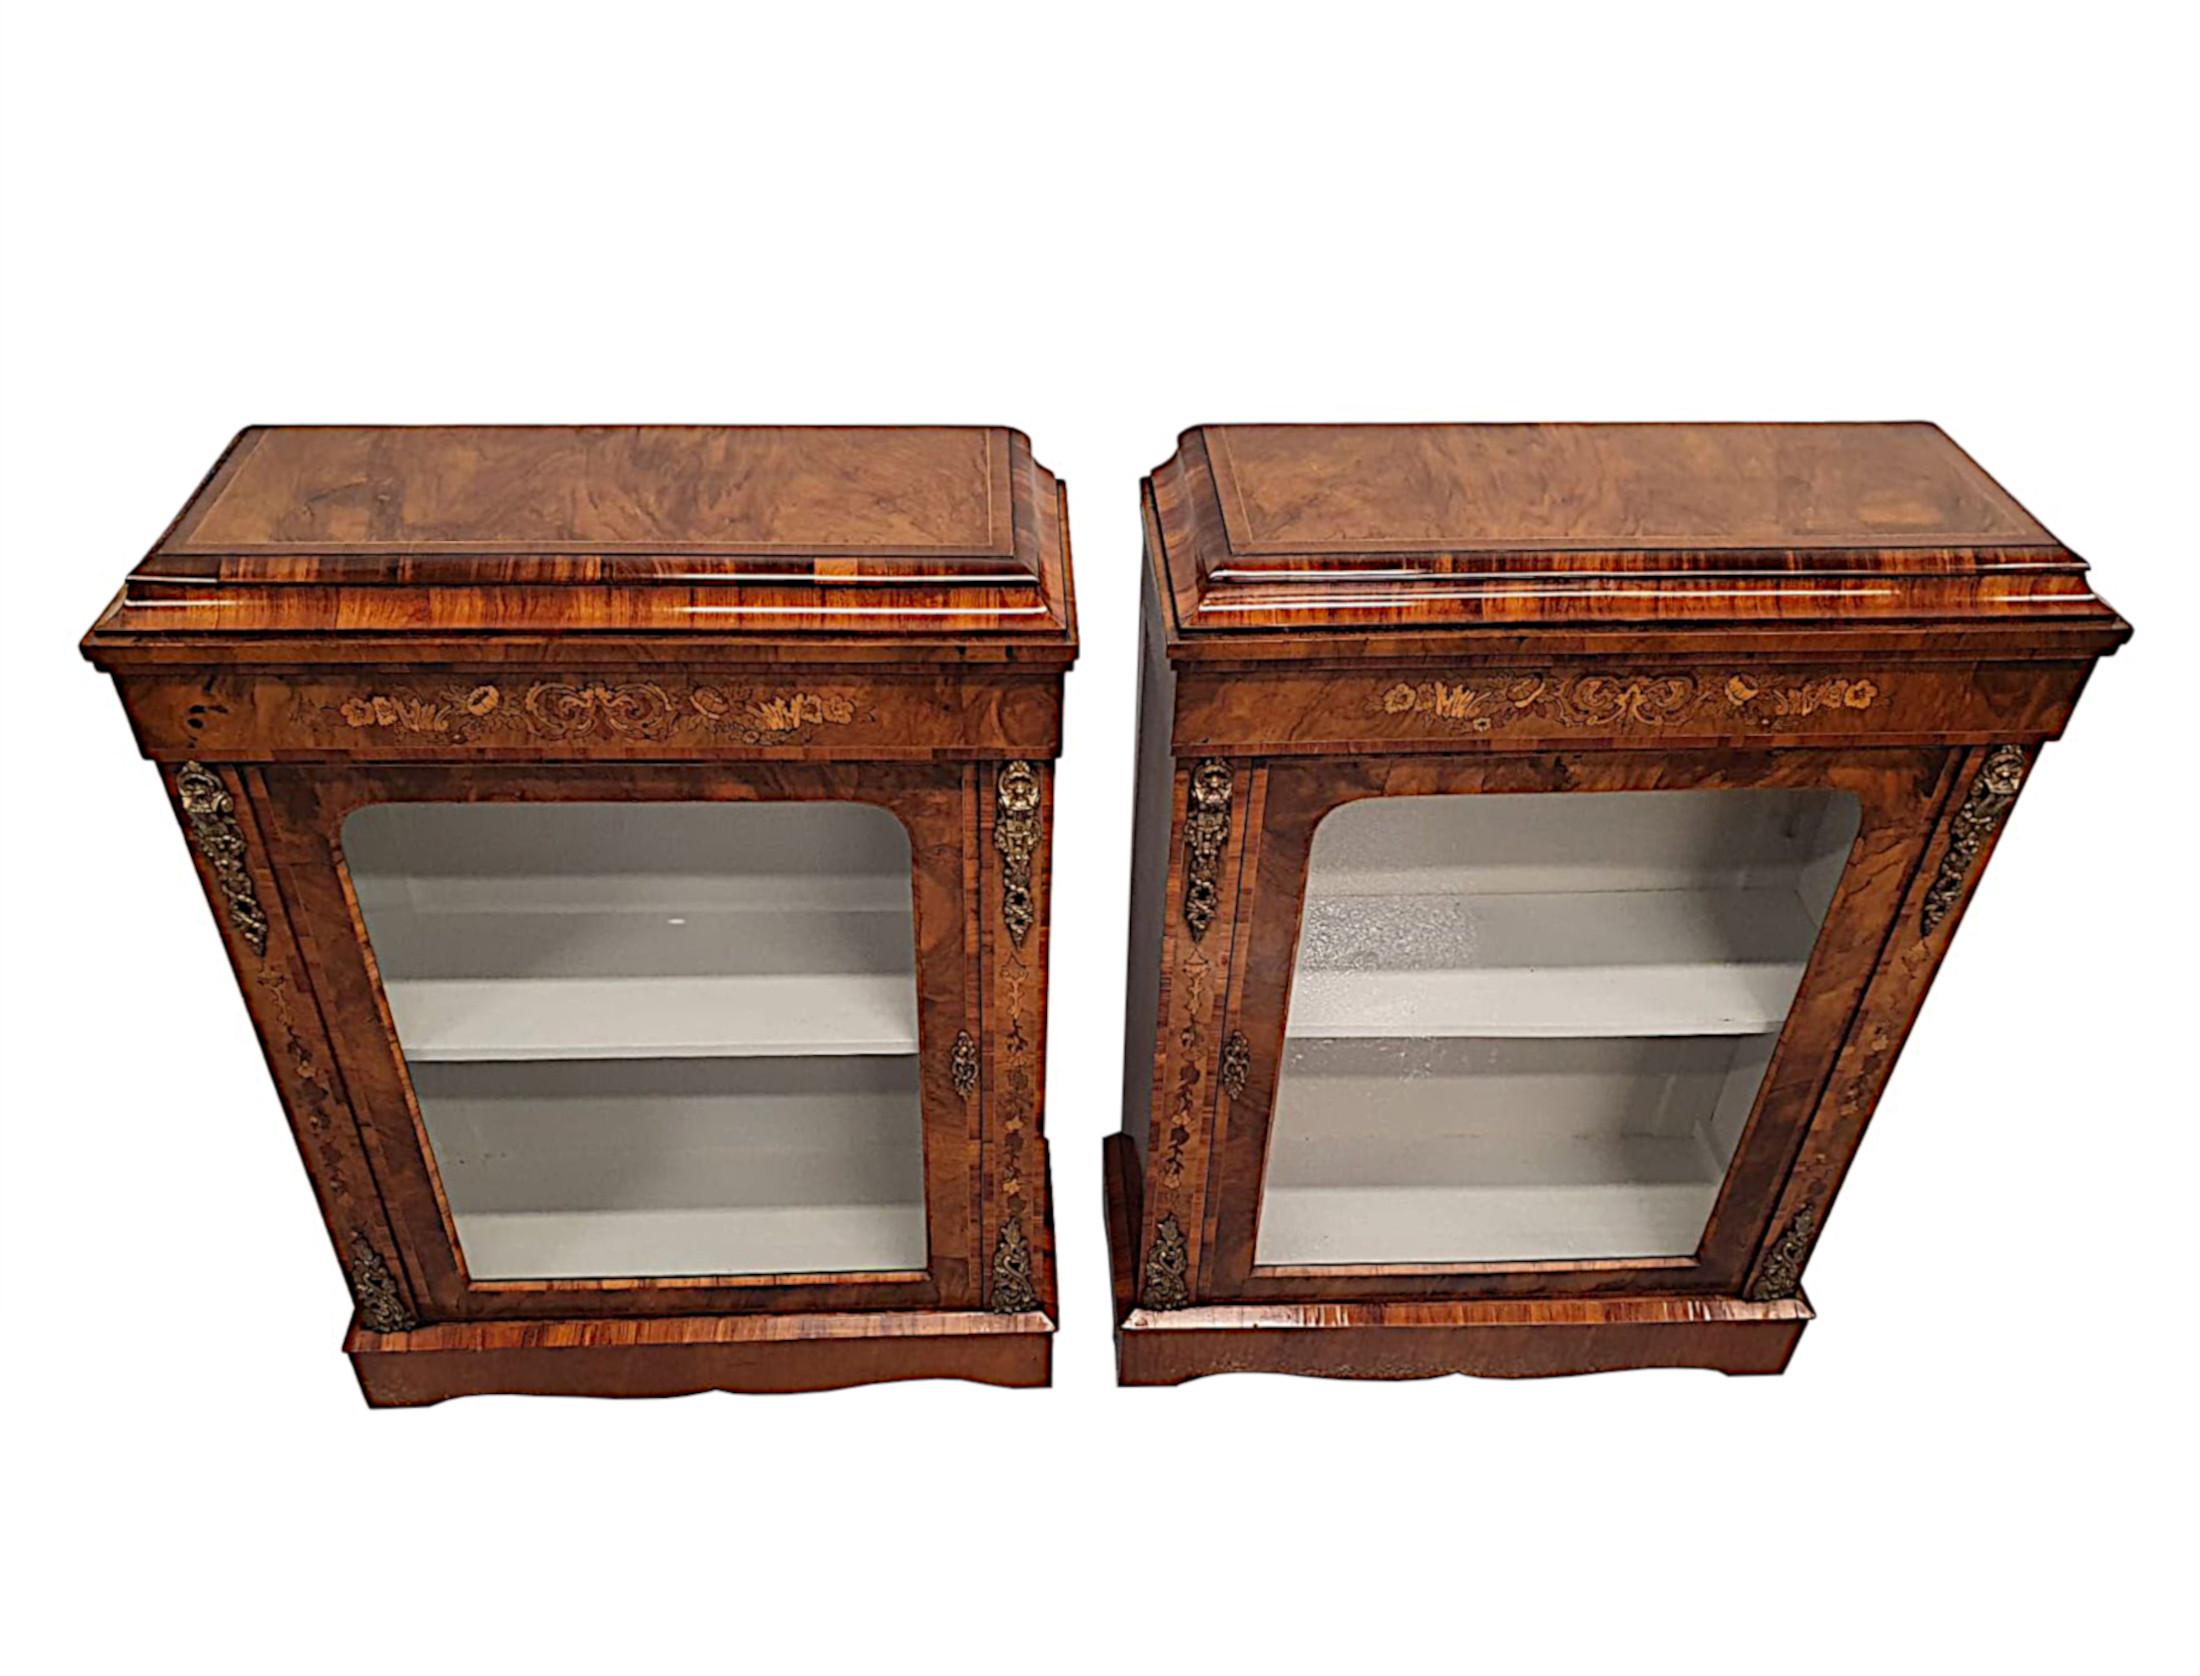 Ormolu Exceptional Pair of Rare 19th Century Pier Cabinets or Bookcases For Sale